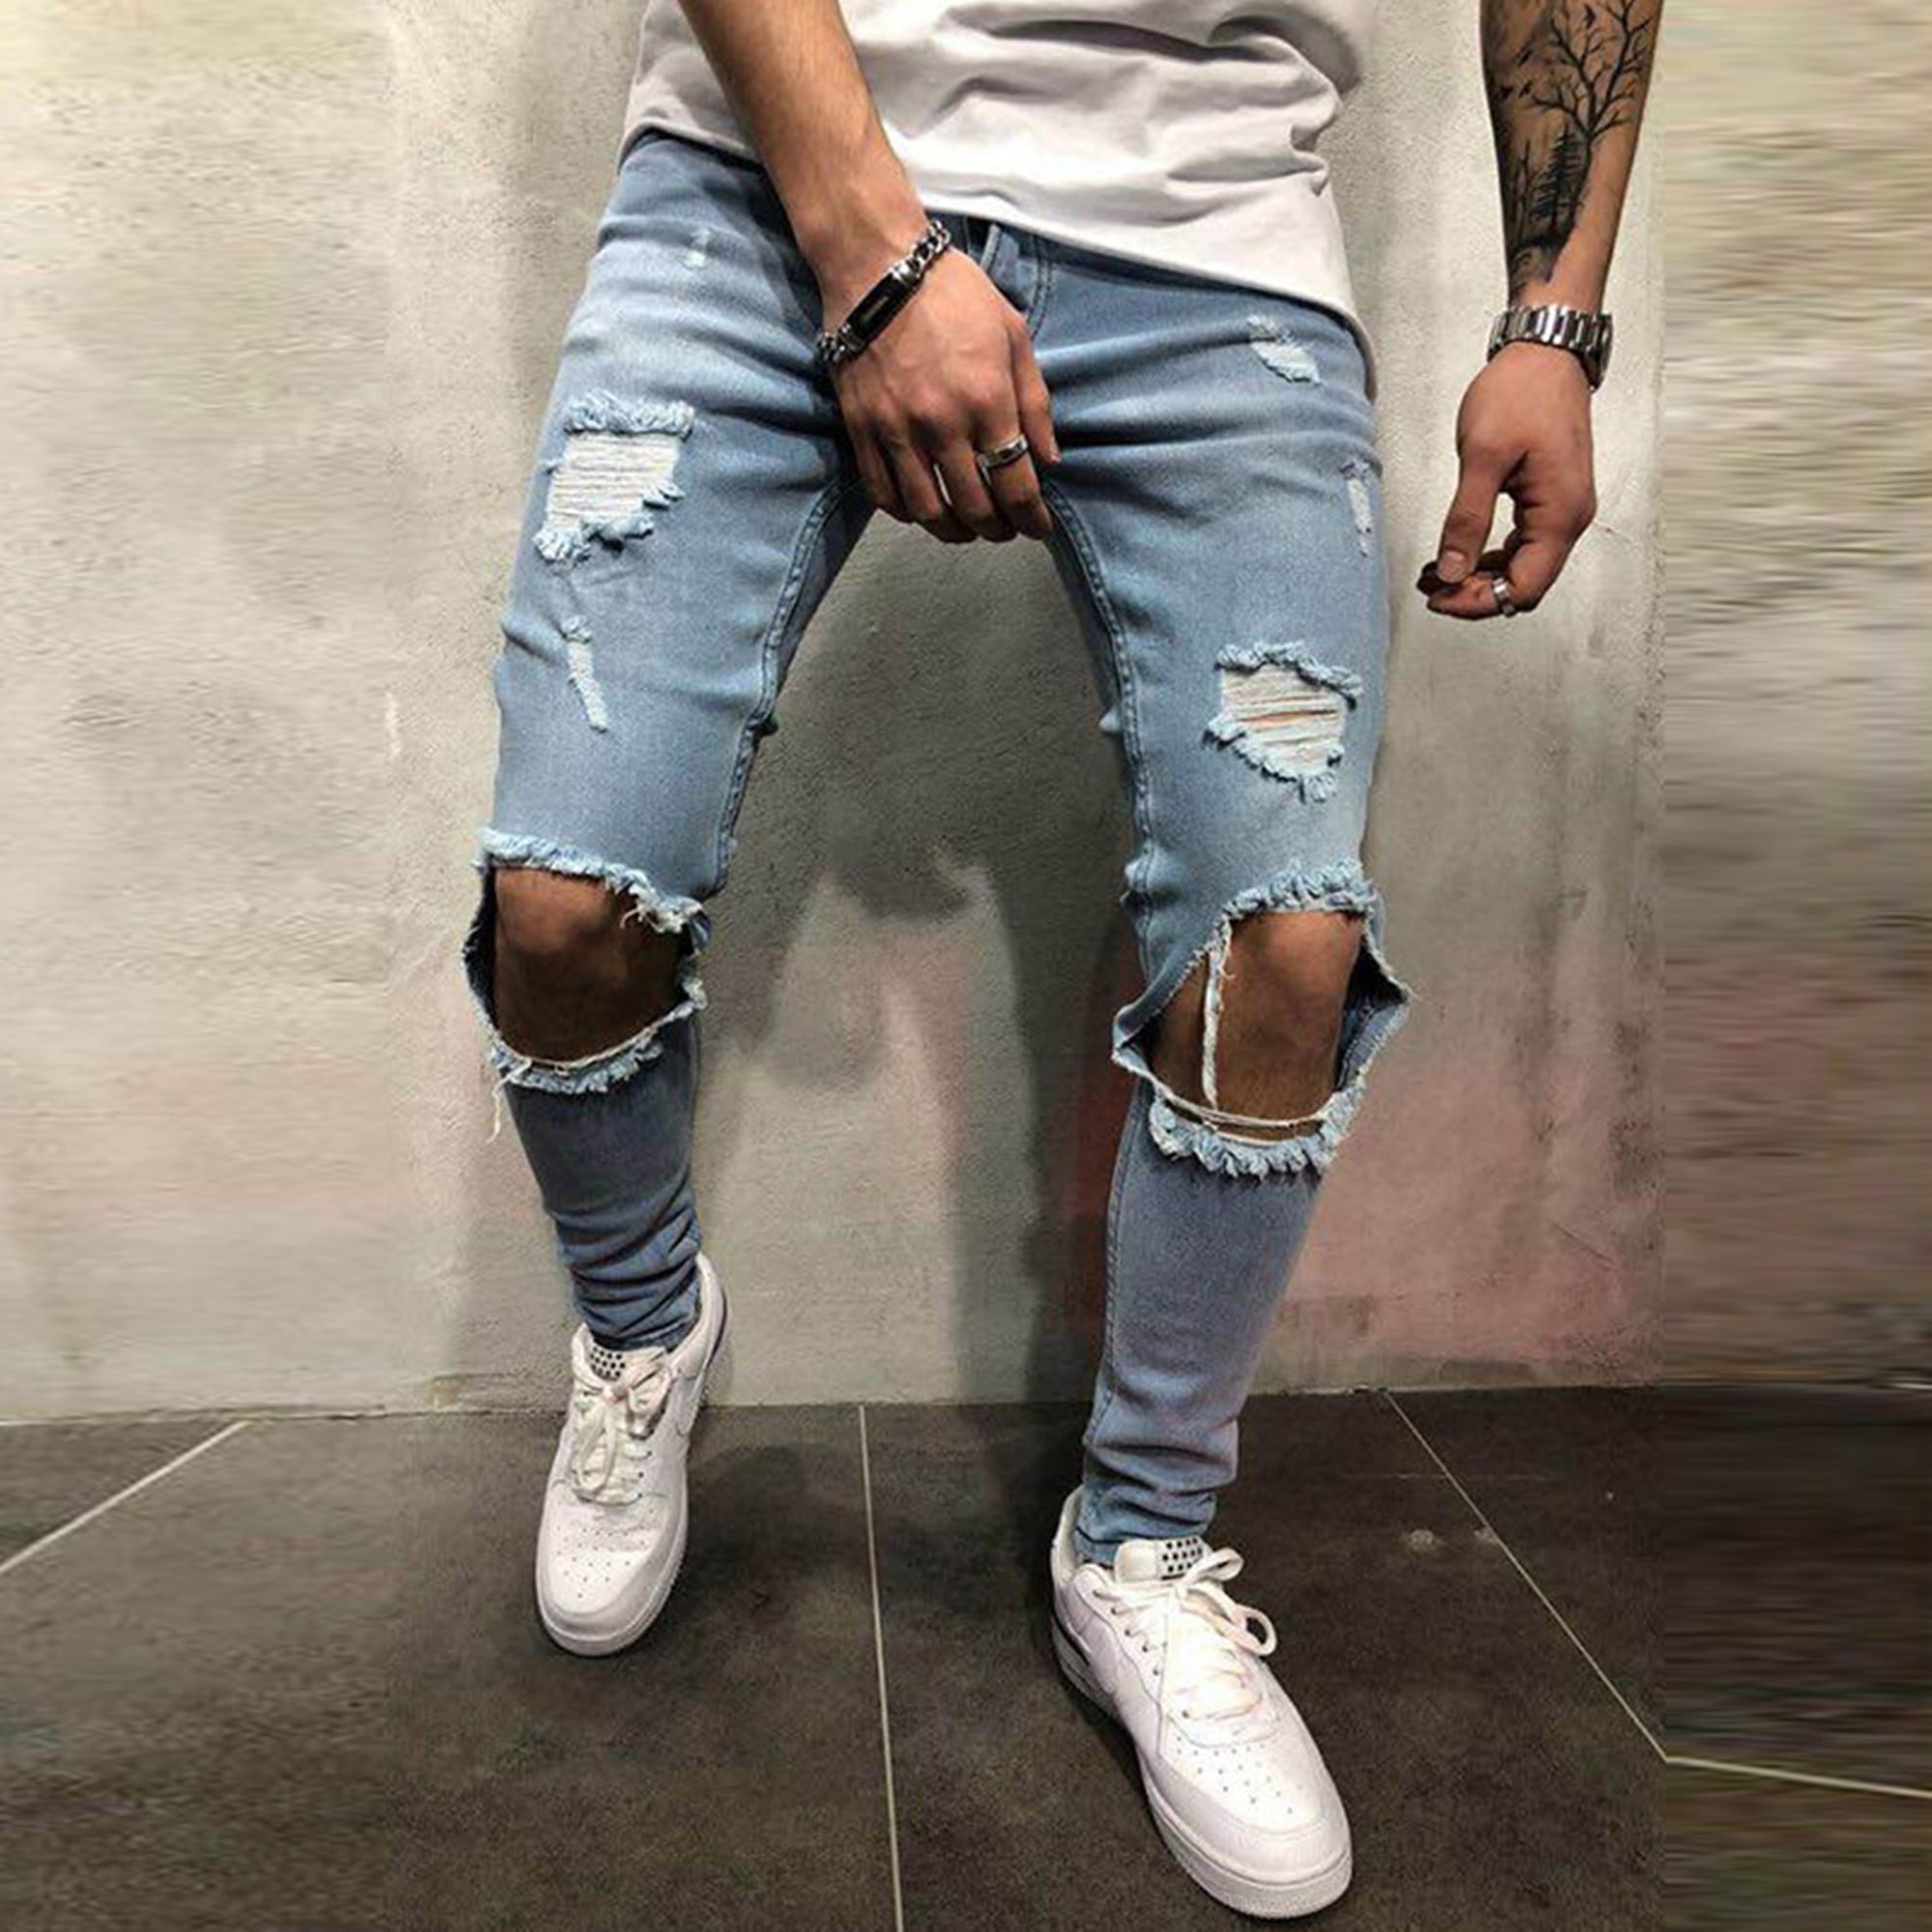 Details about   Mens Long Jeans Skinny Ripped Pencil Pants Slim Frayed Distressed Denim Trousers 